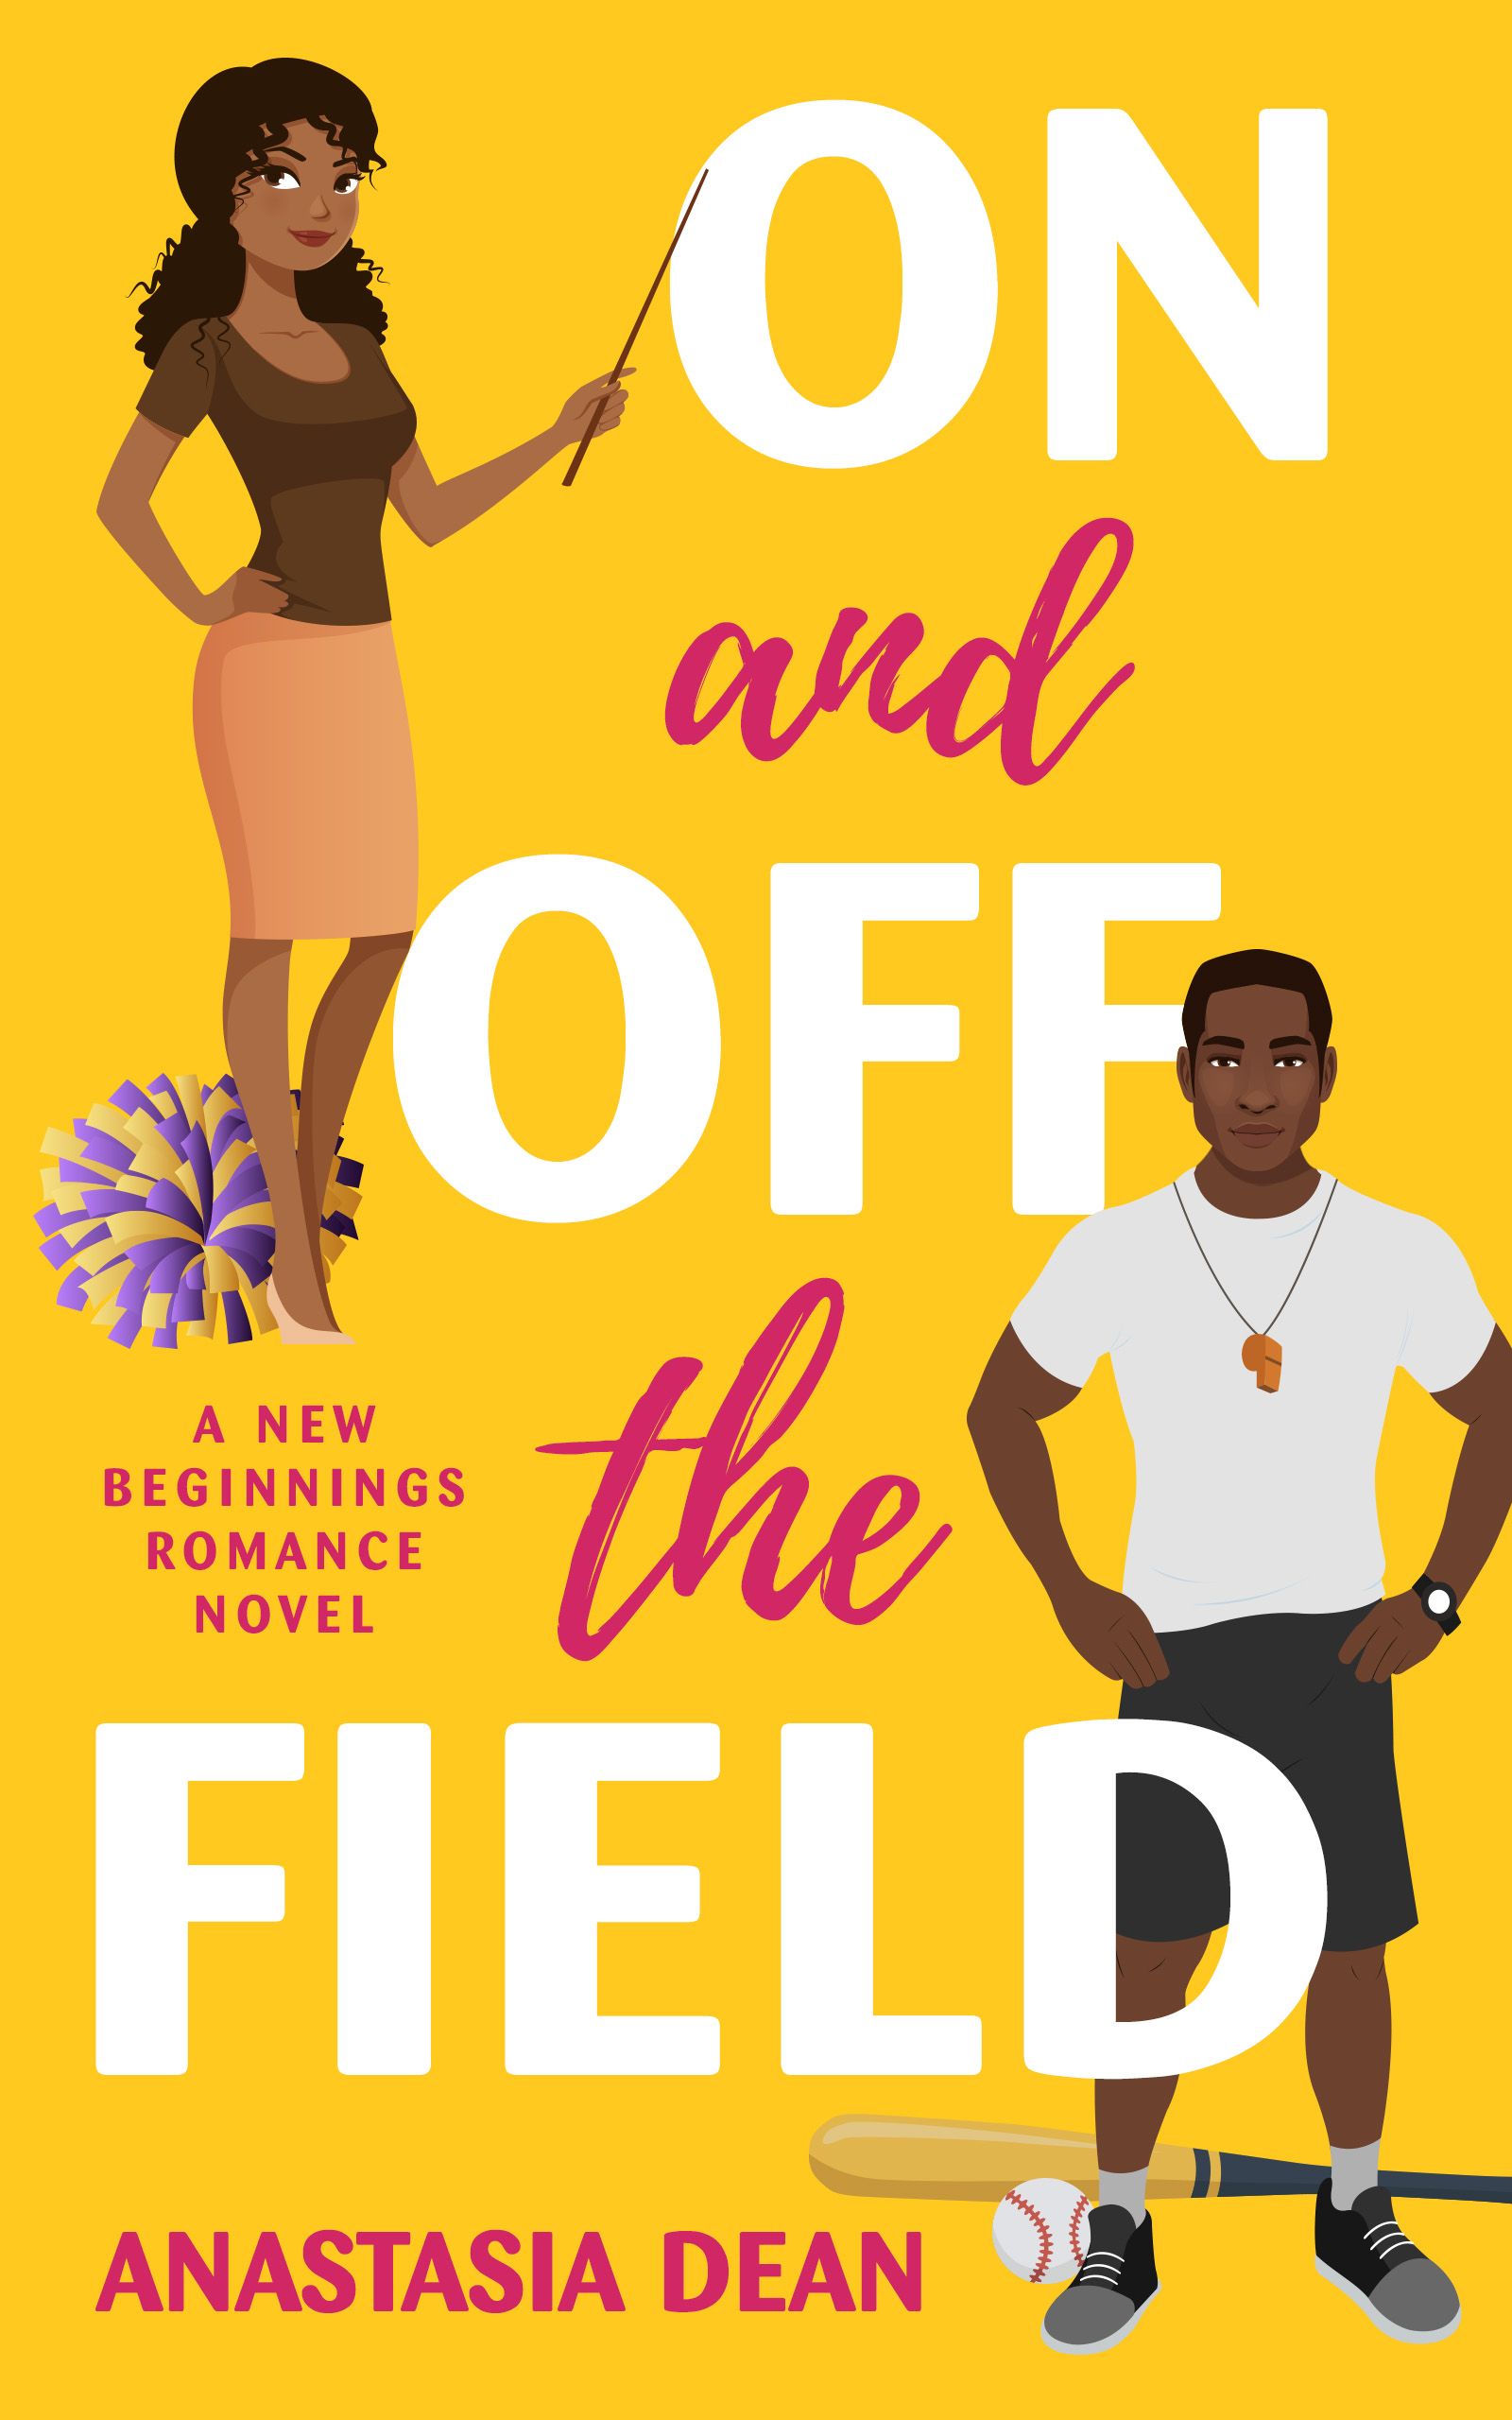 Cover of On and Off The Field by Anastasia Dean